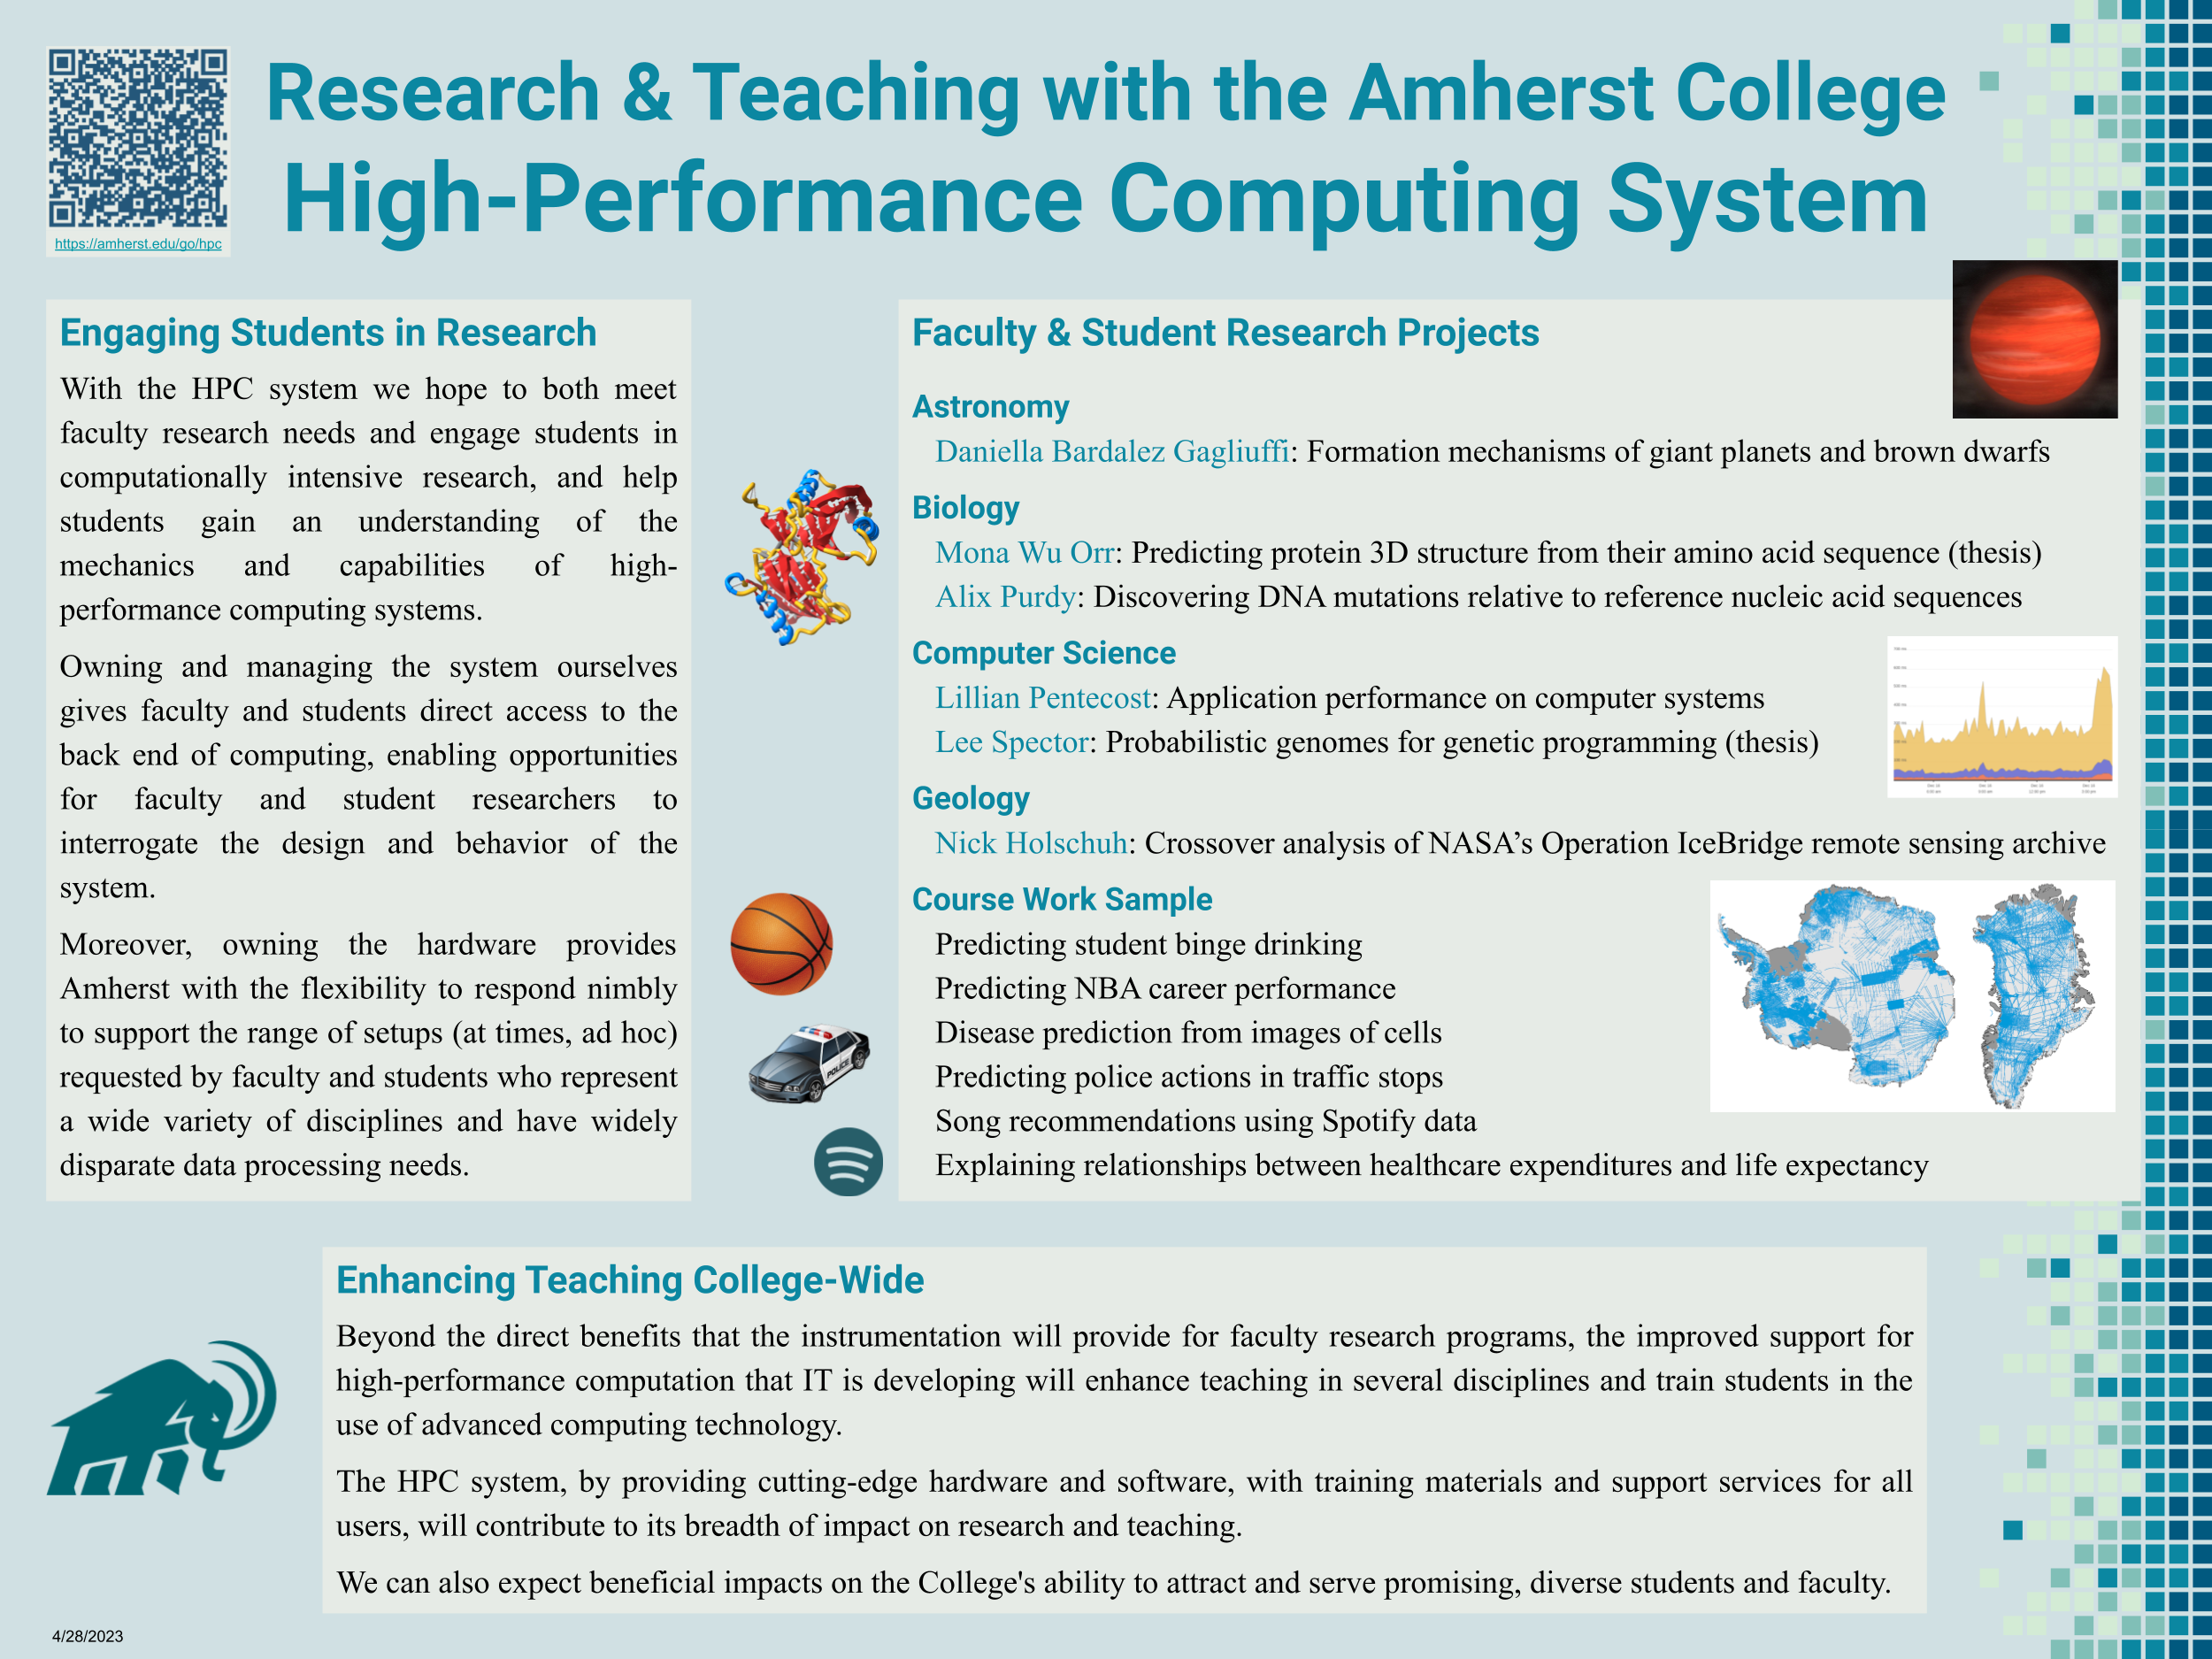 Engaging Students in Research; Enhancing Teaching College-Wide